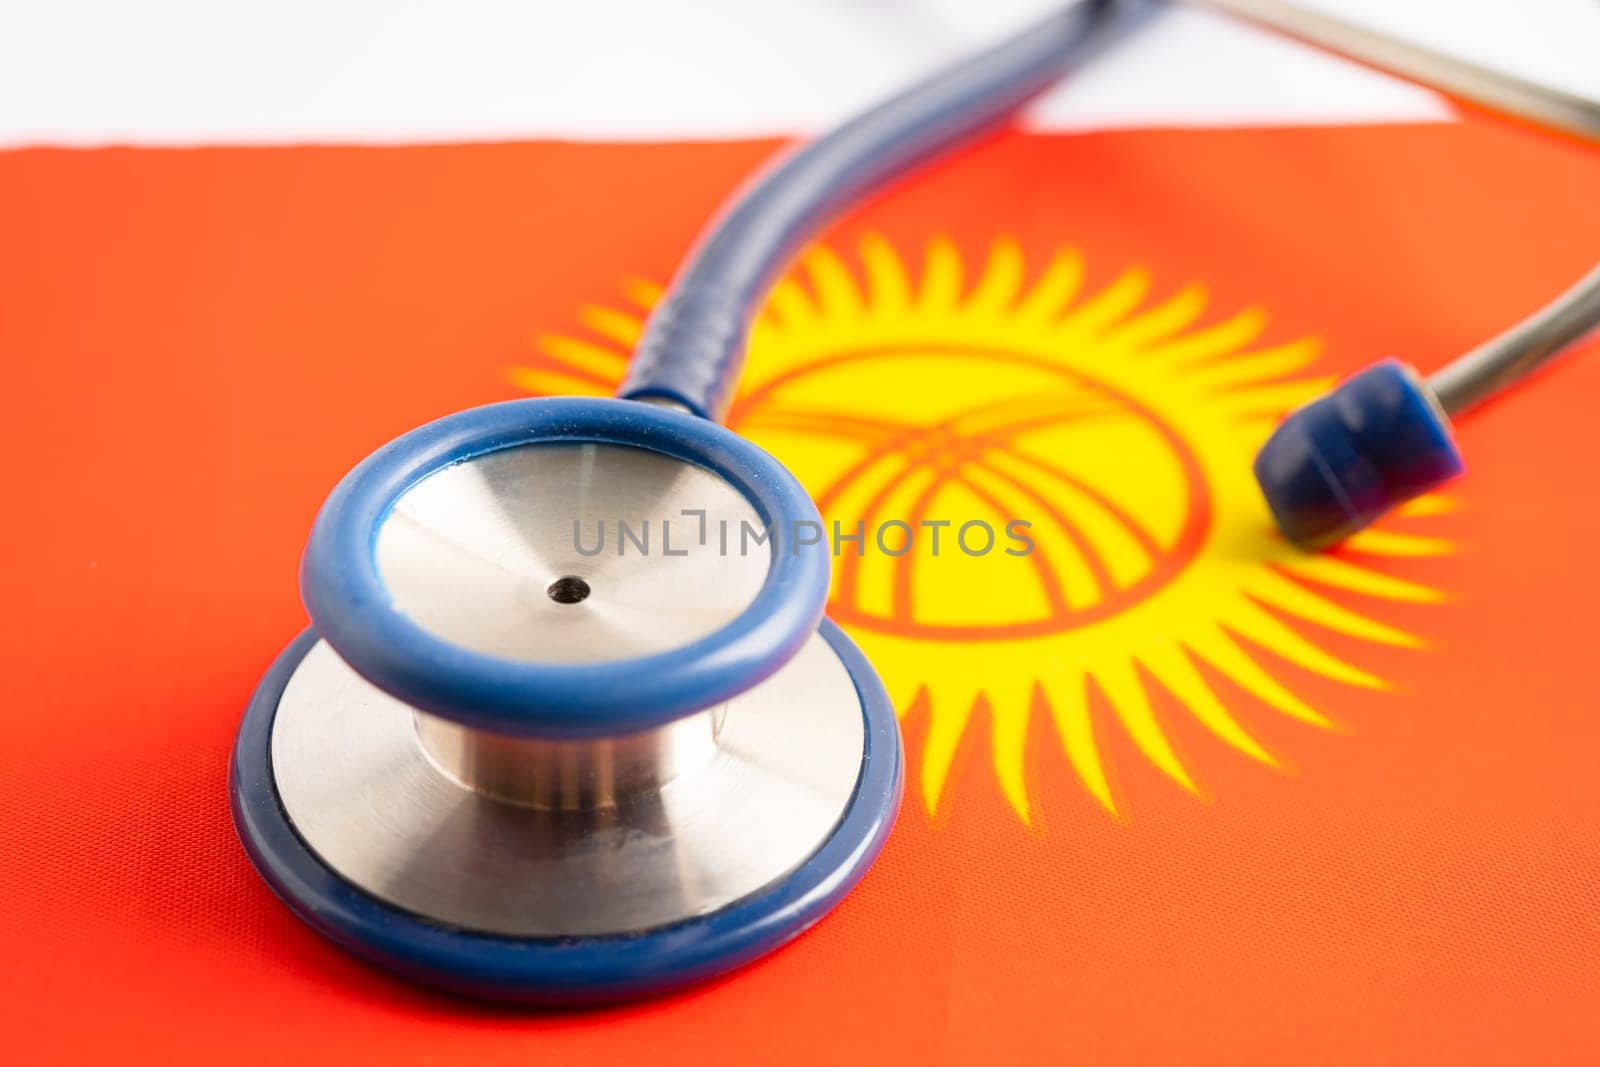 Stethoscope on Kyrgyzstan flag background, Business and finance concept. by pamai